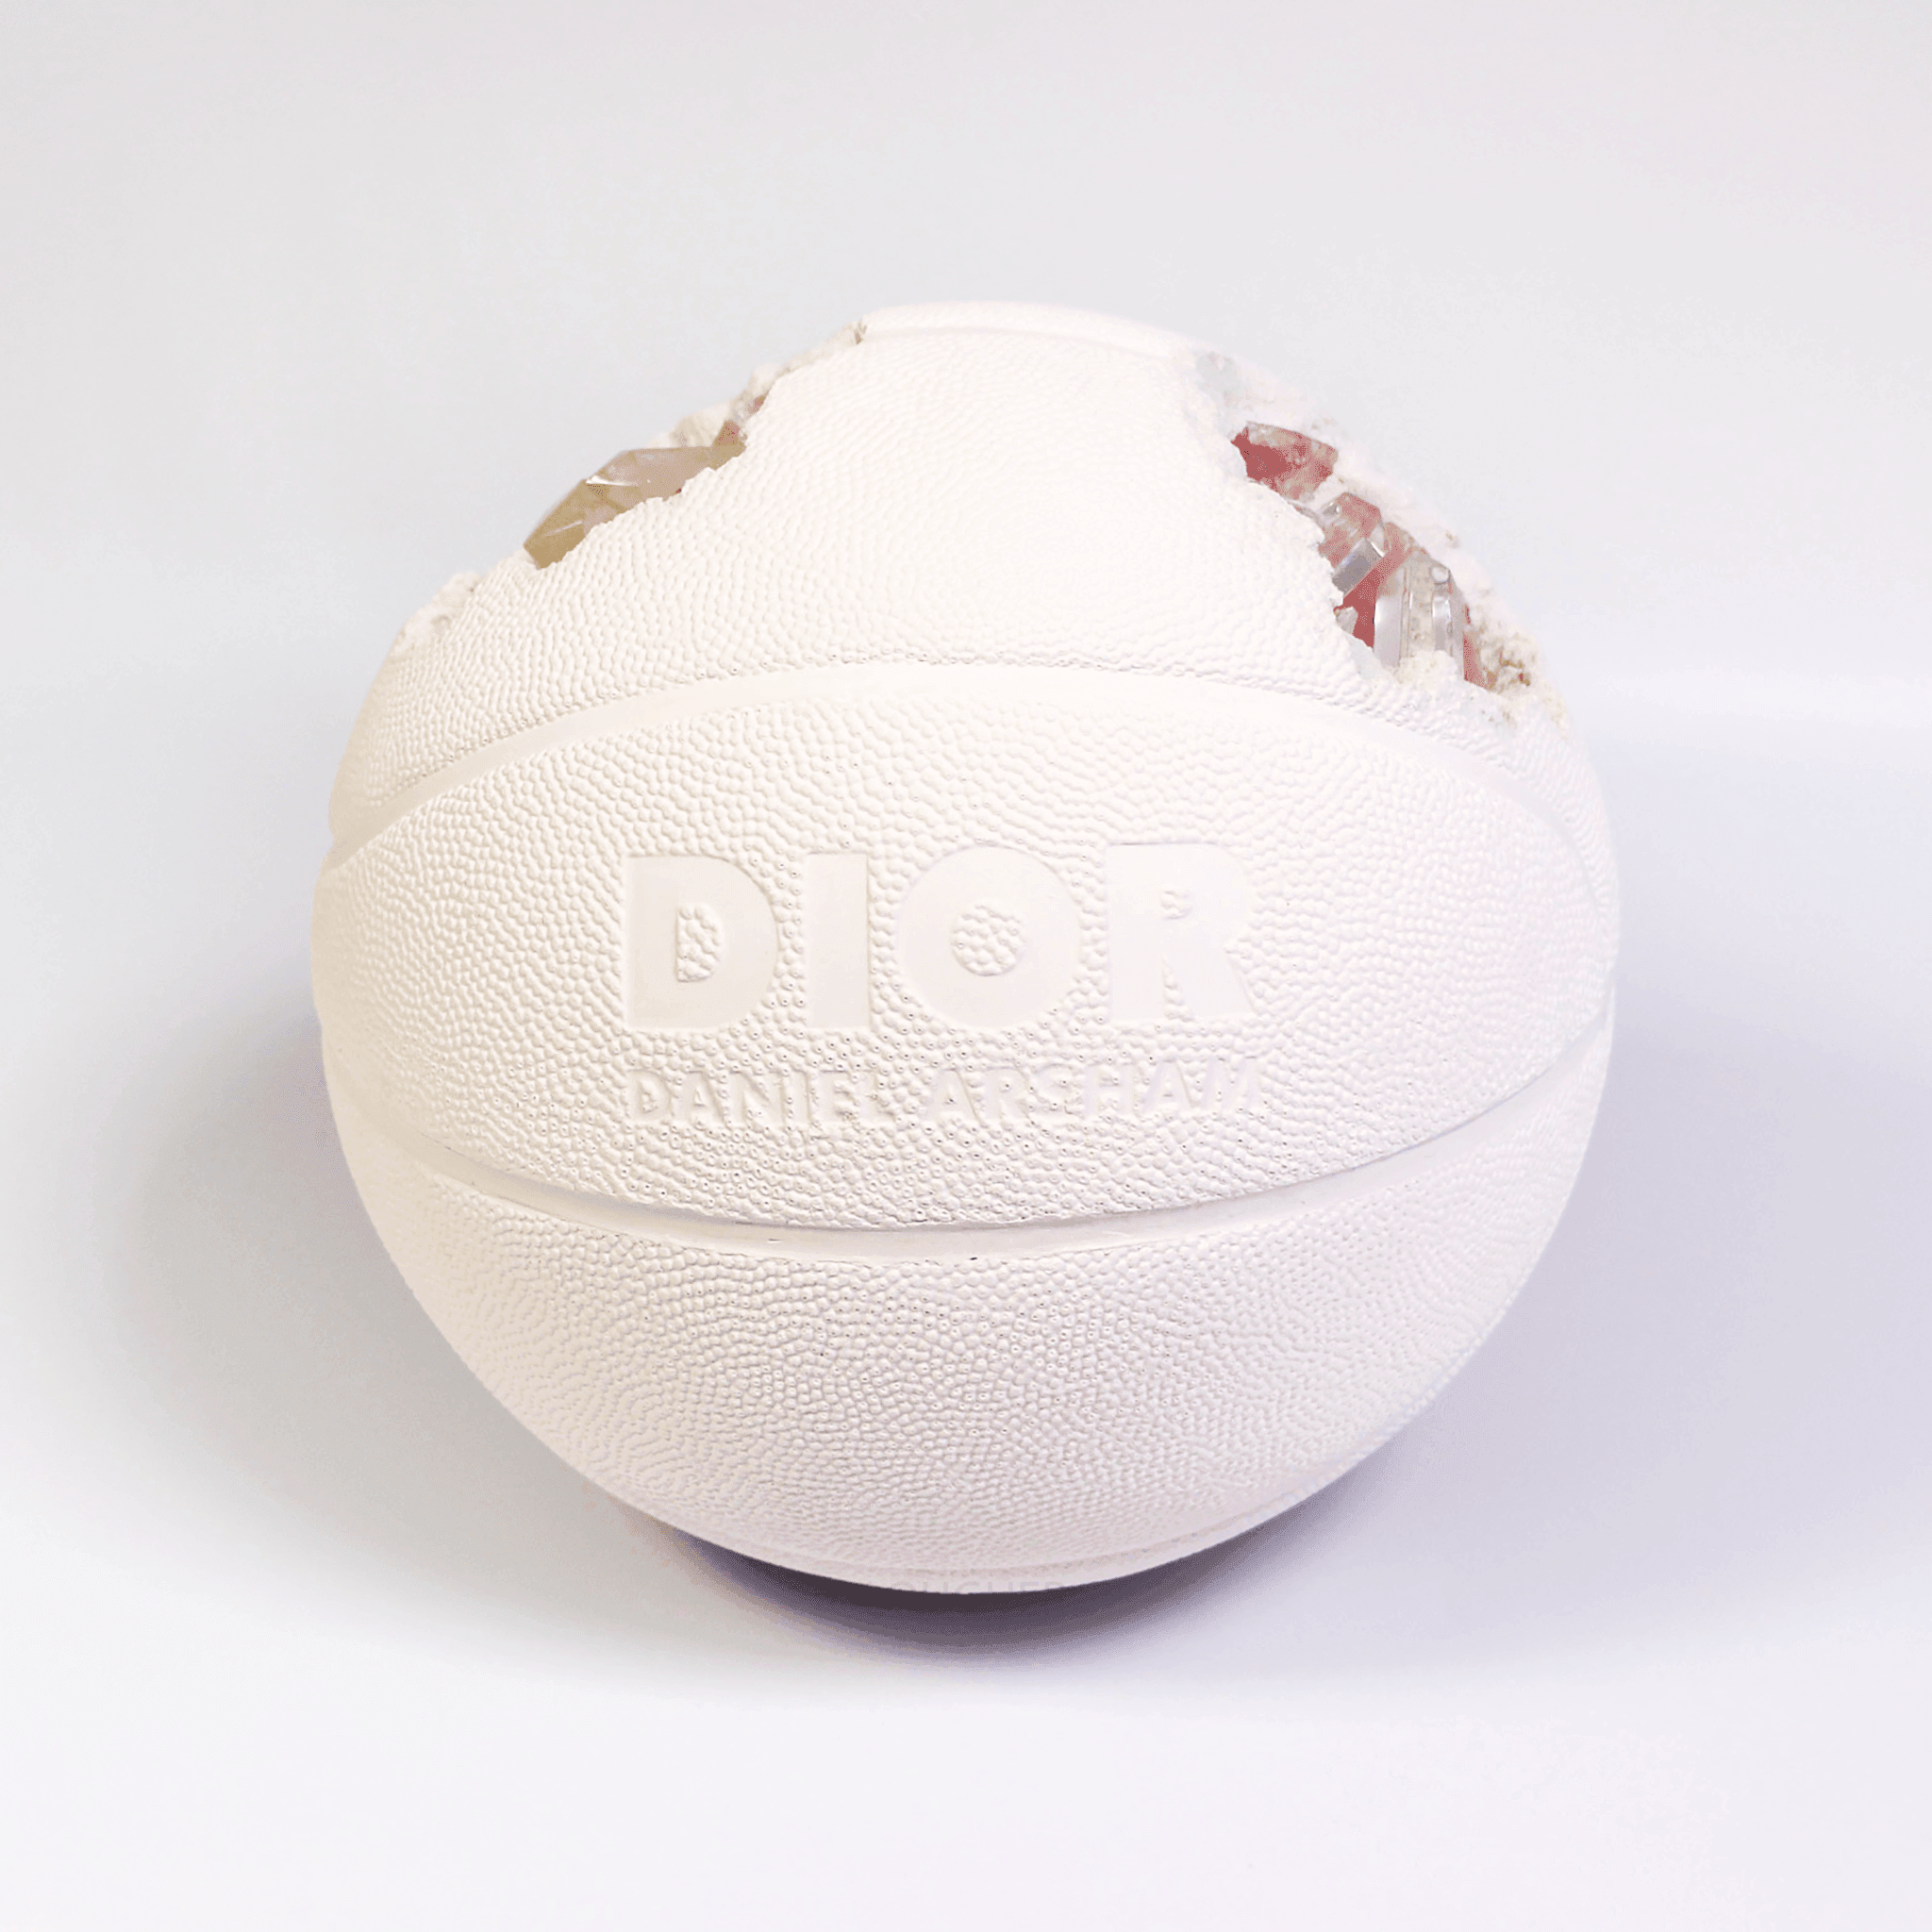 Daniel Arsham x Dior, Future Relic Eroded Basketball, 2020 For Sale - Lougher Contemporary